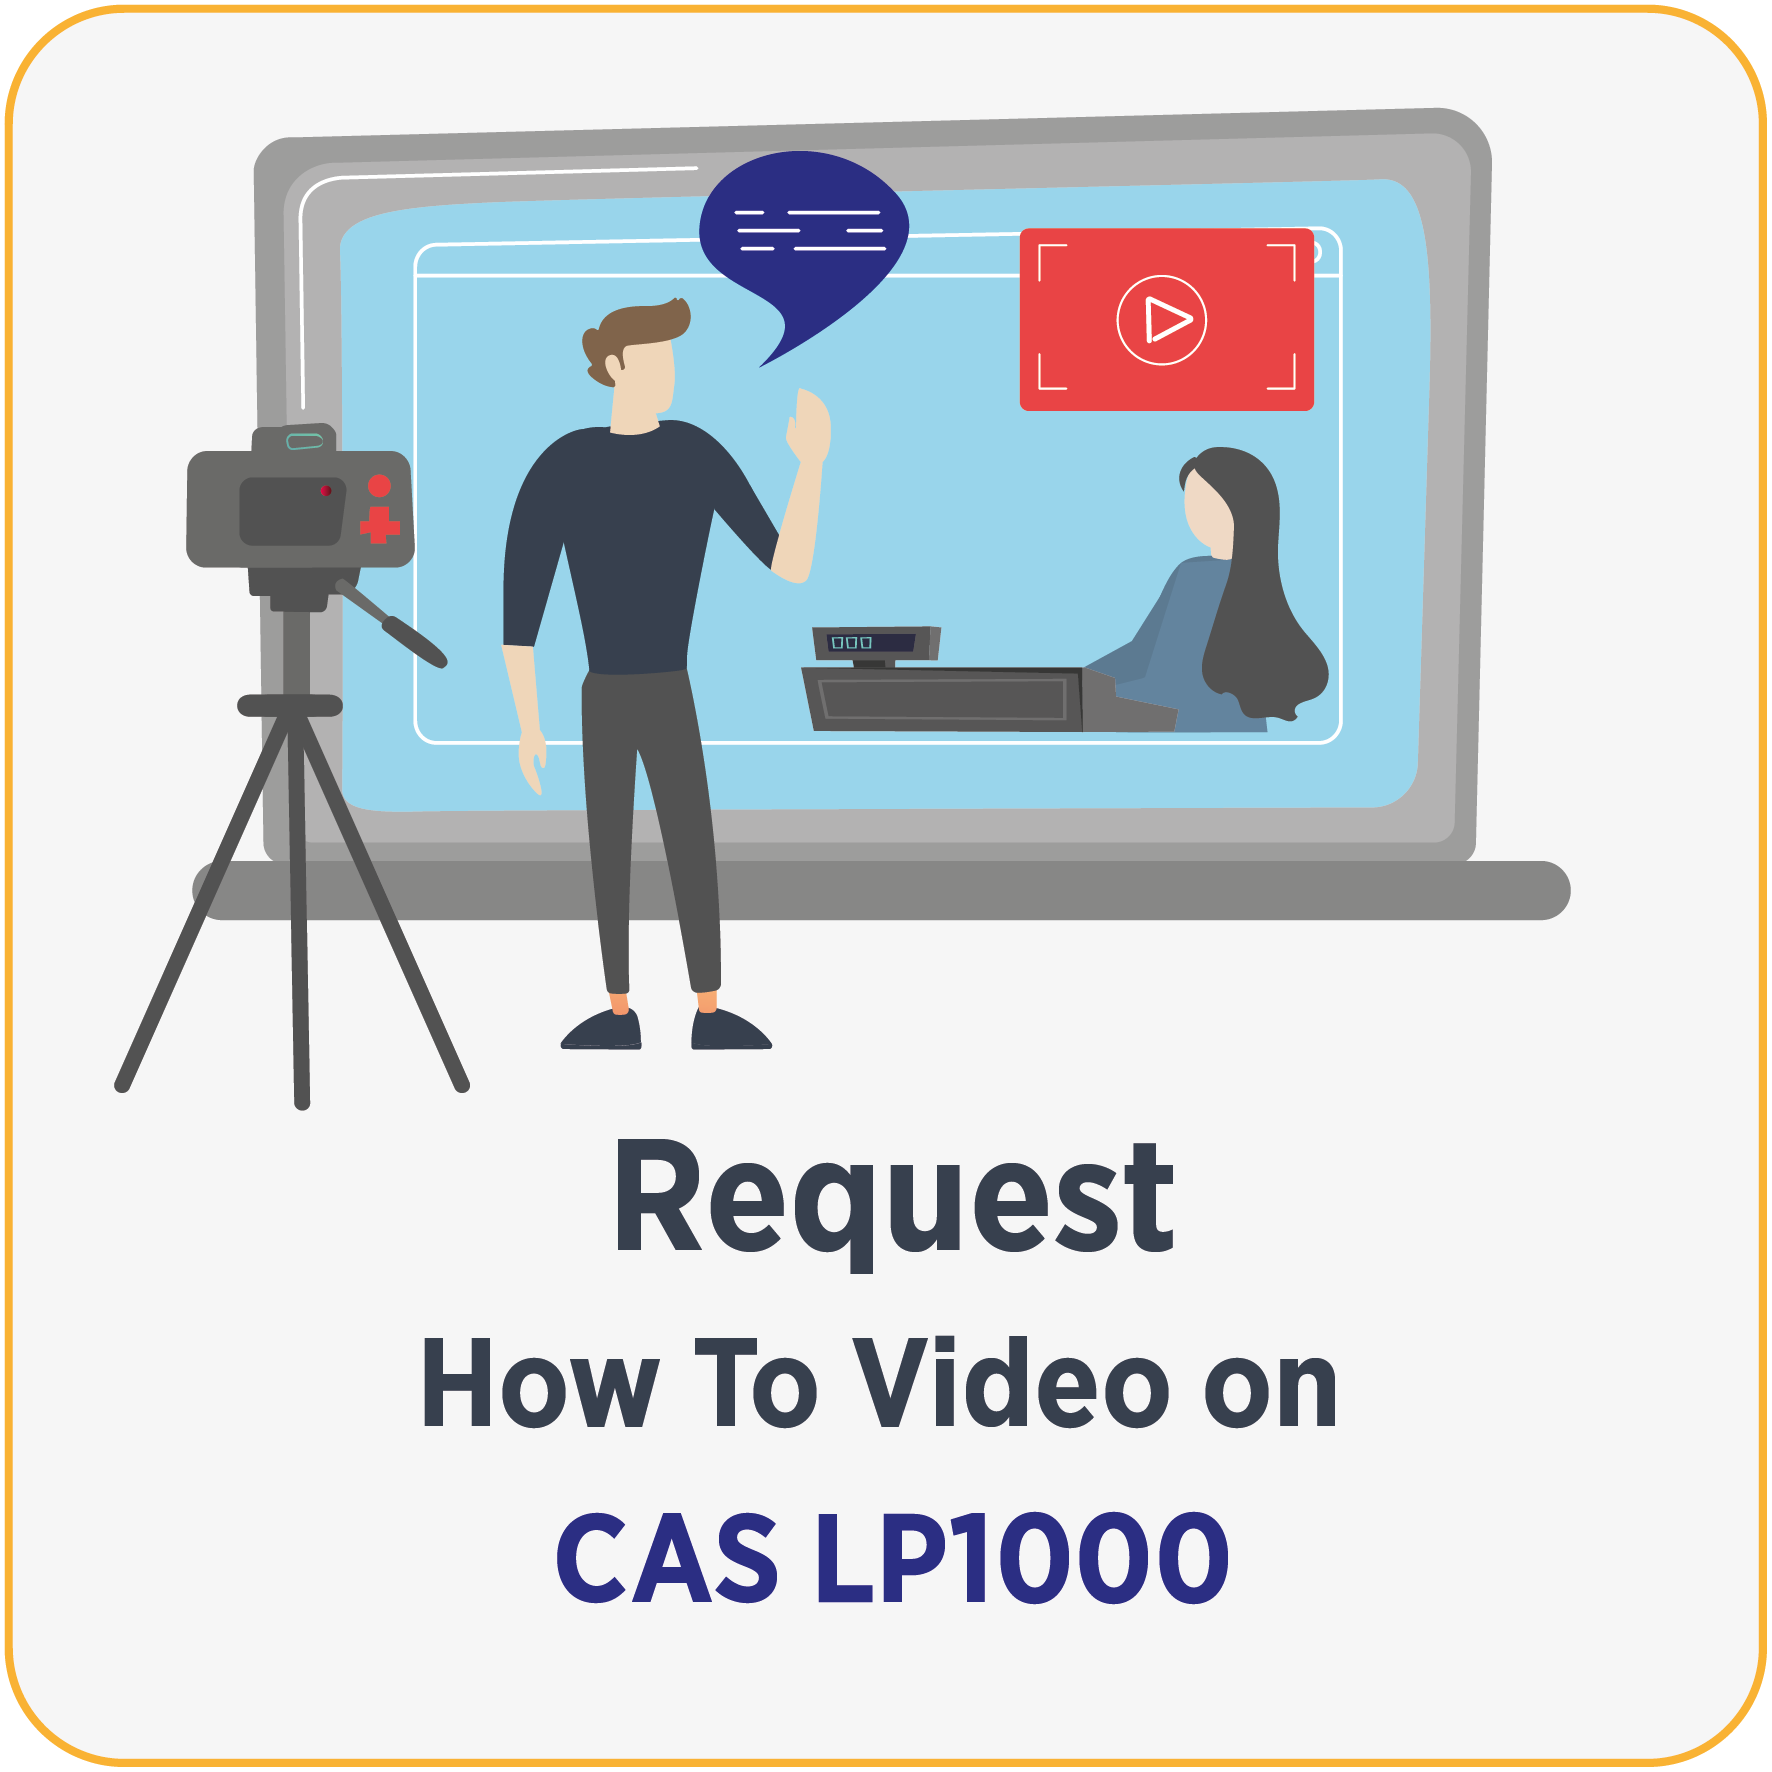 Commission a "How to" Video for CAS LP1000N or LP1000NP